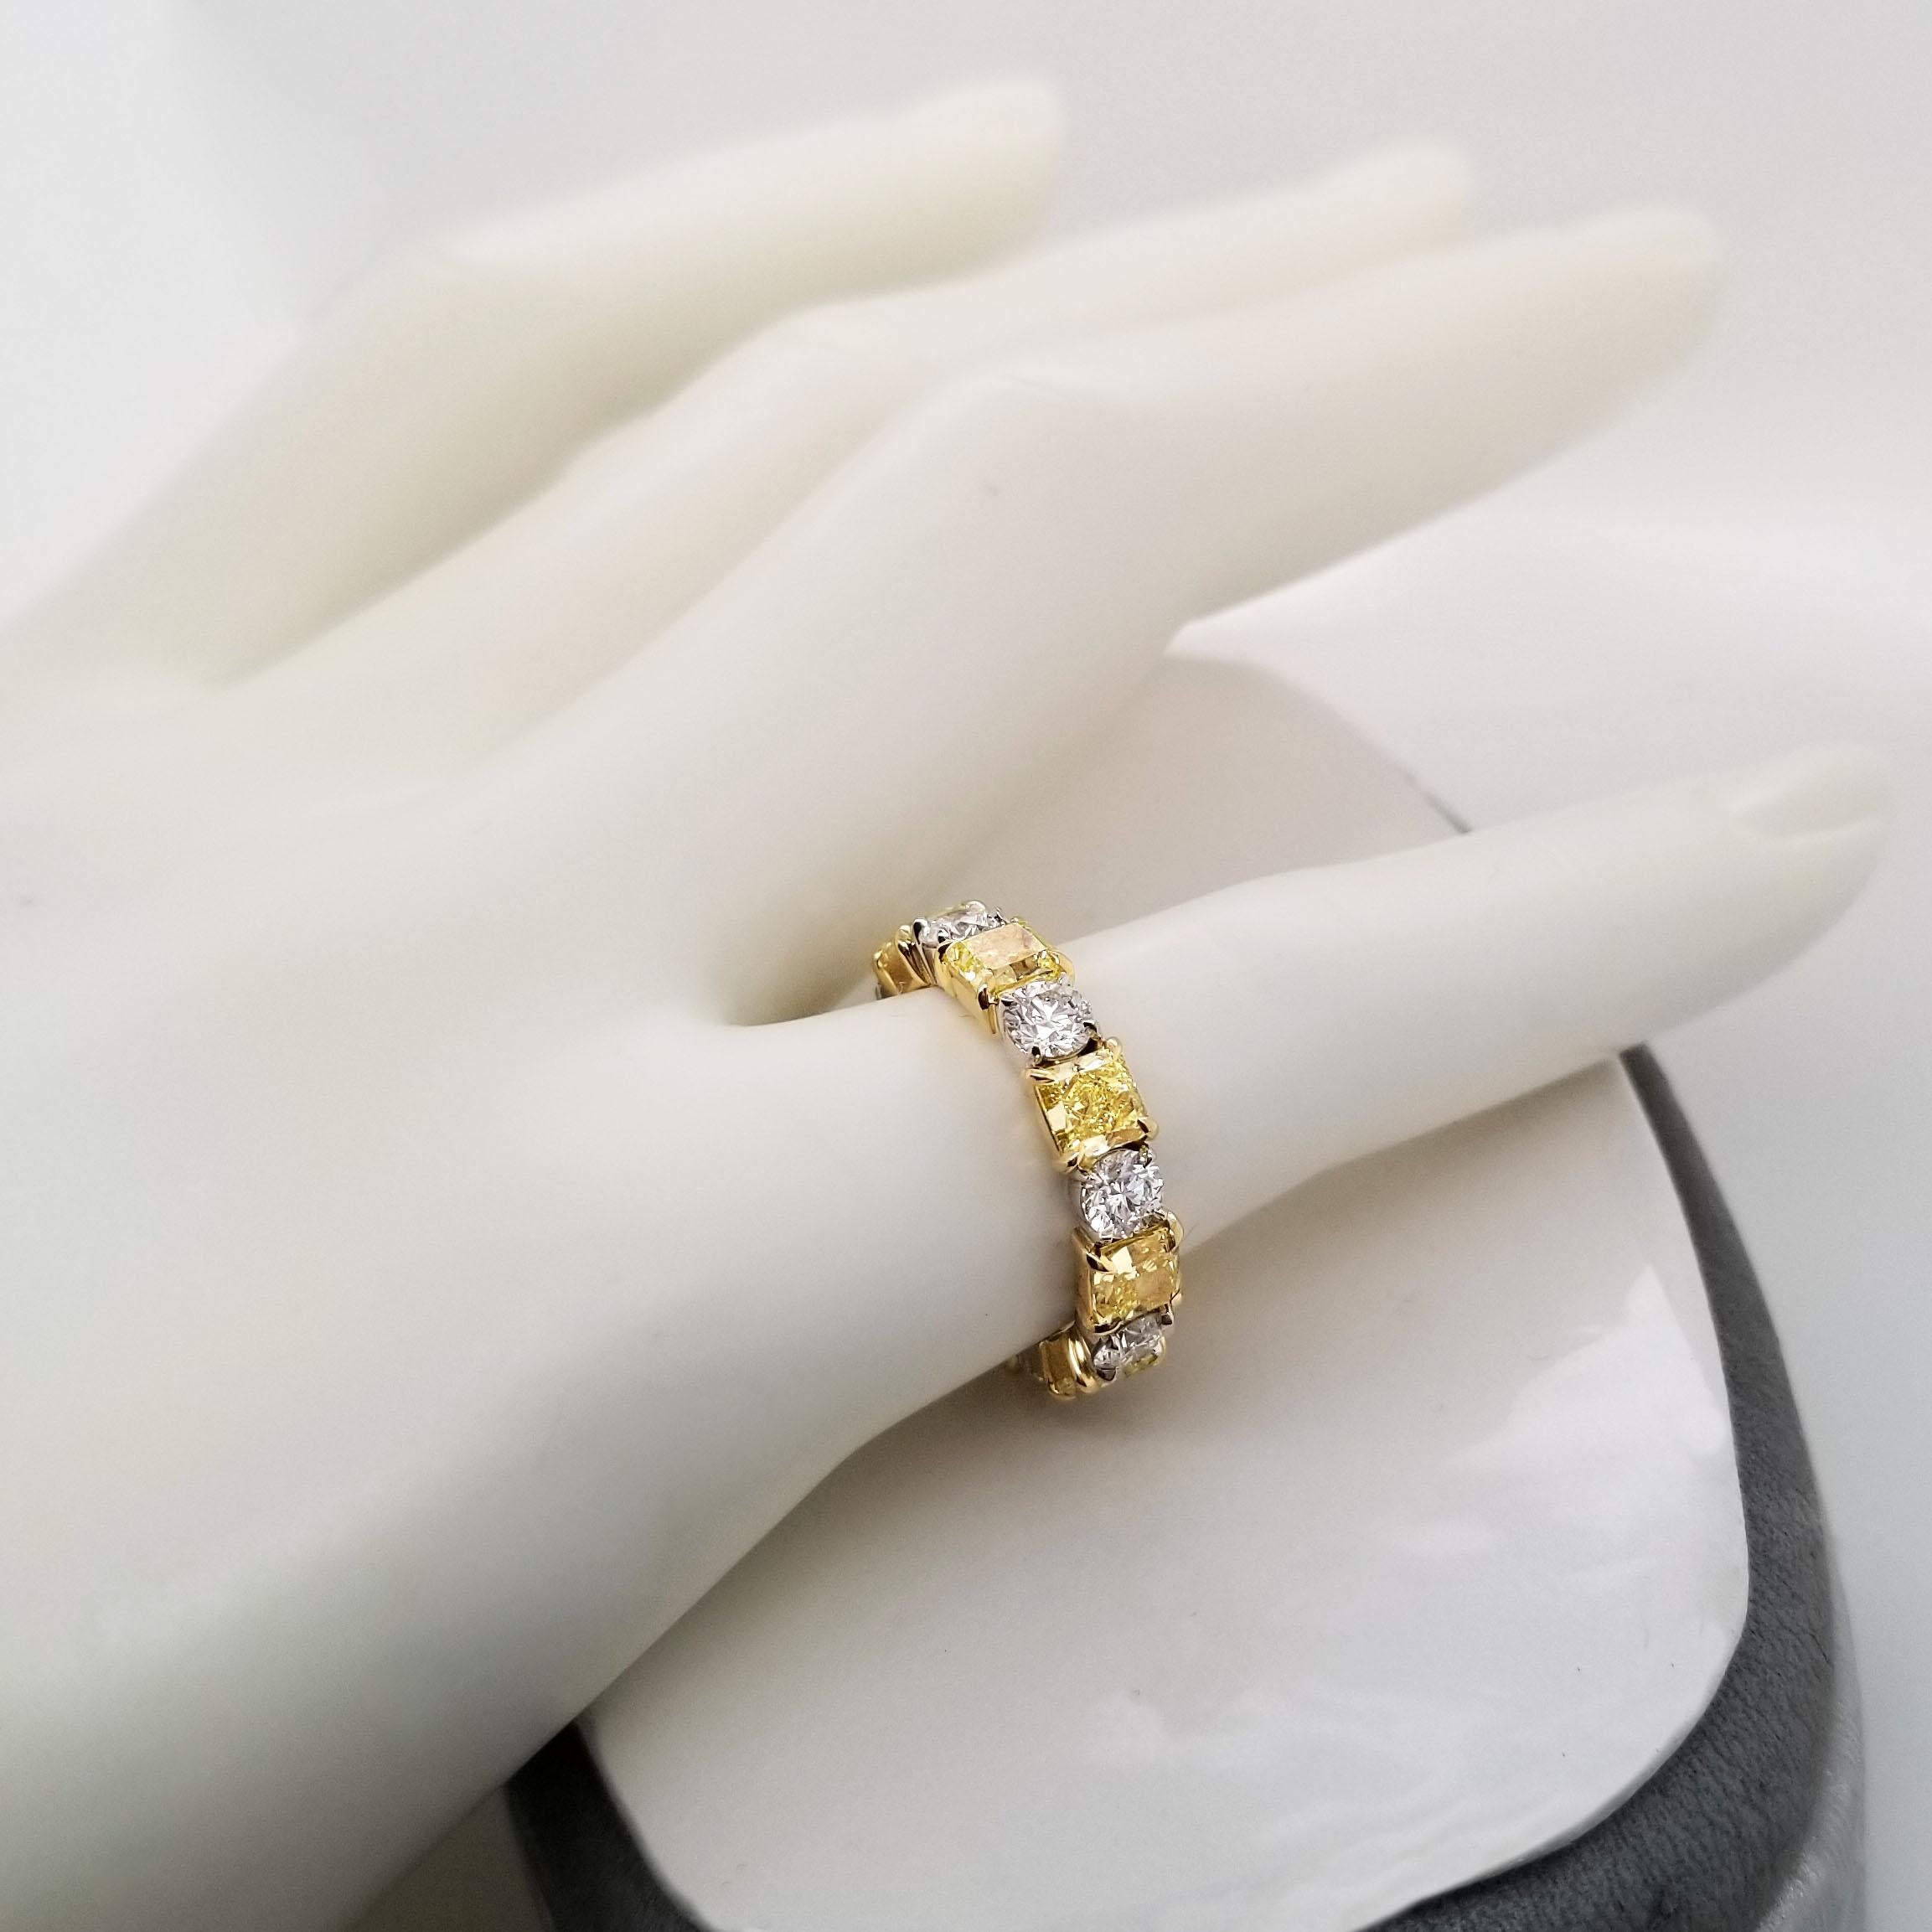 This Fancy duo color diamonds Eternity band is a pleasure to wear every day and contains 3.16 carats of natural fancy intense yellow diamonds in 8 stones GIA Certified (pictures of some of the certificates are available for detailed stone purpose)